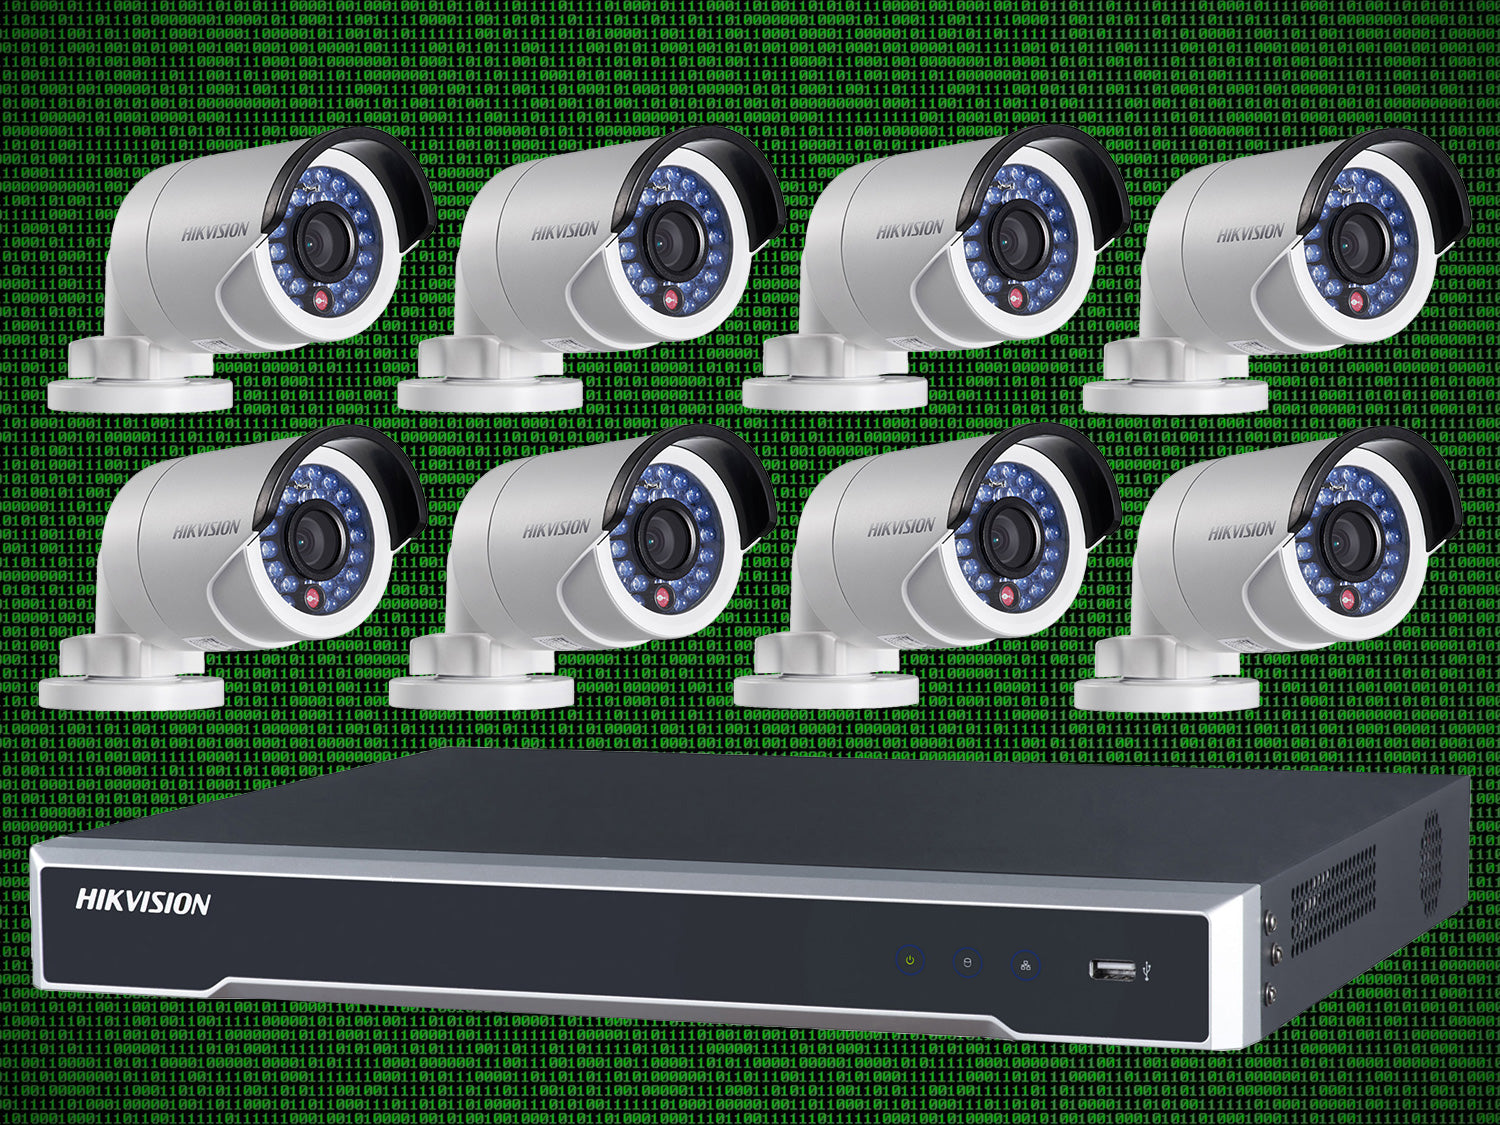 How many IP cameras can my network handle?